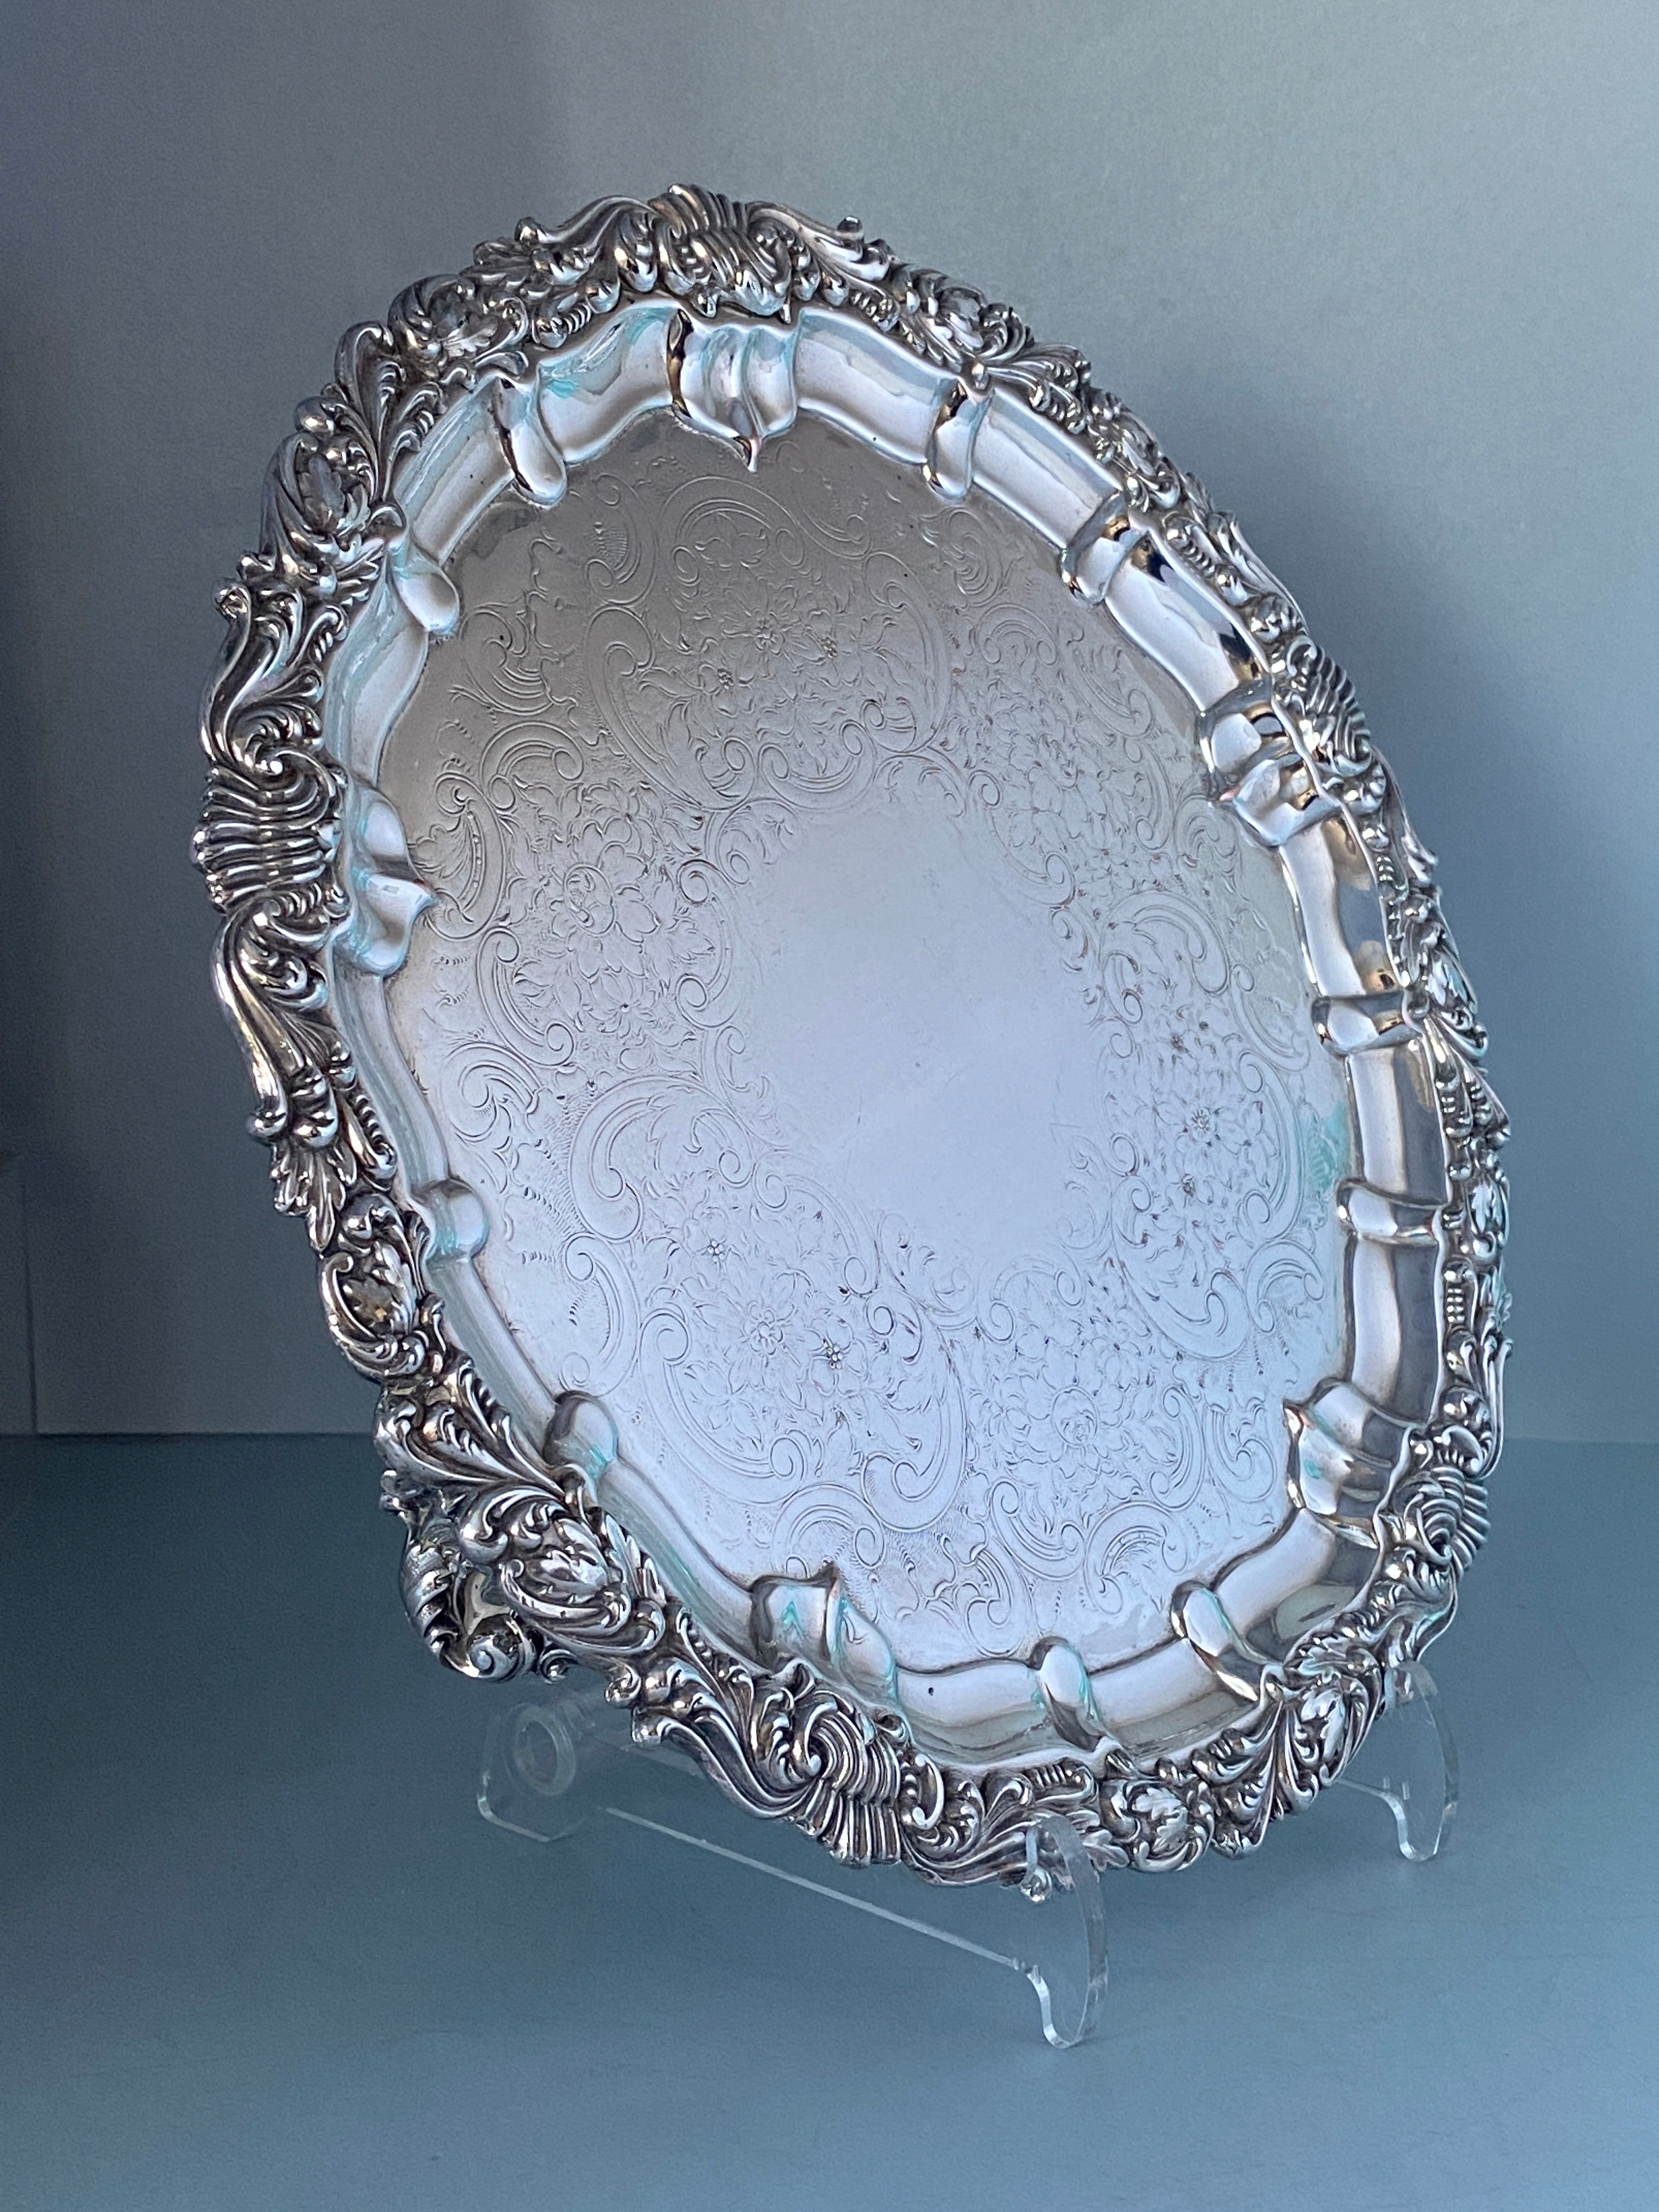 Antique Silver Plated Tray/Salver